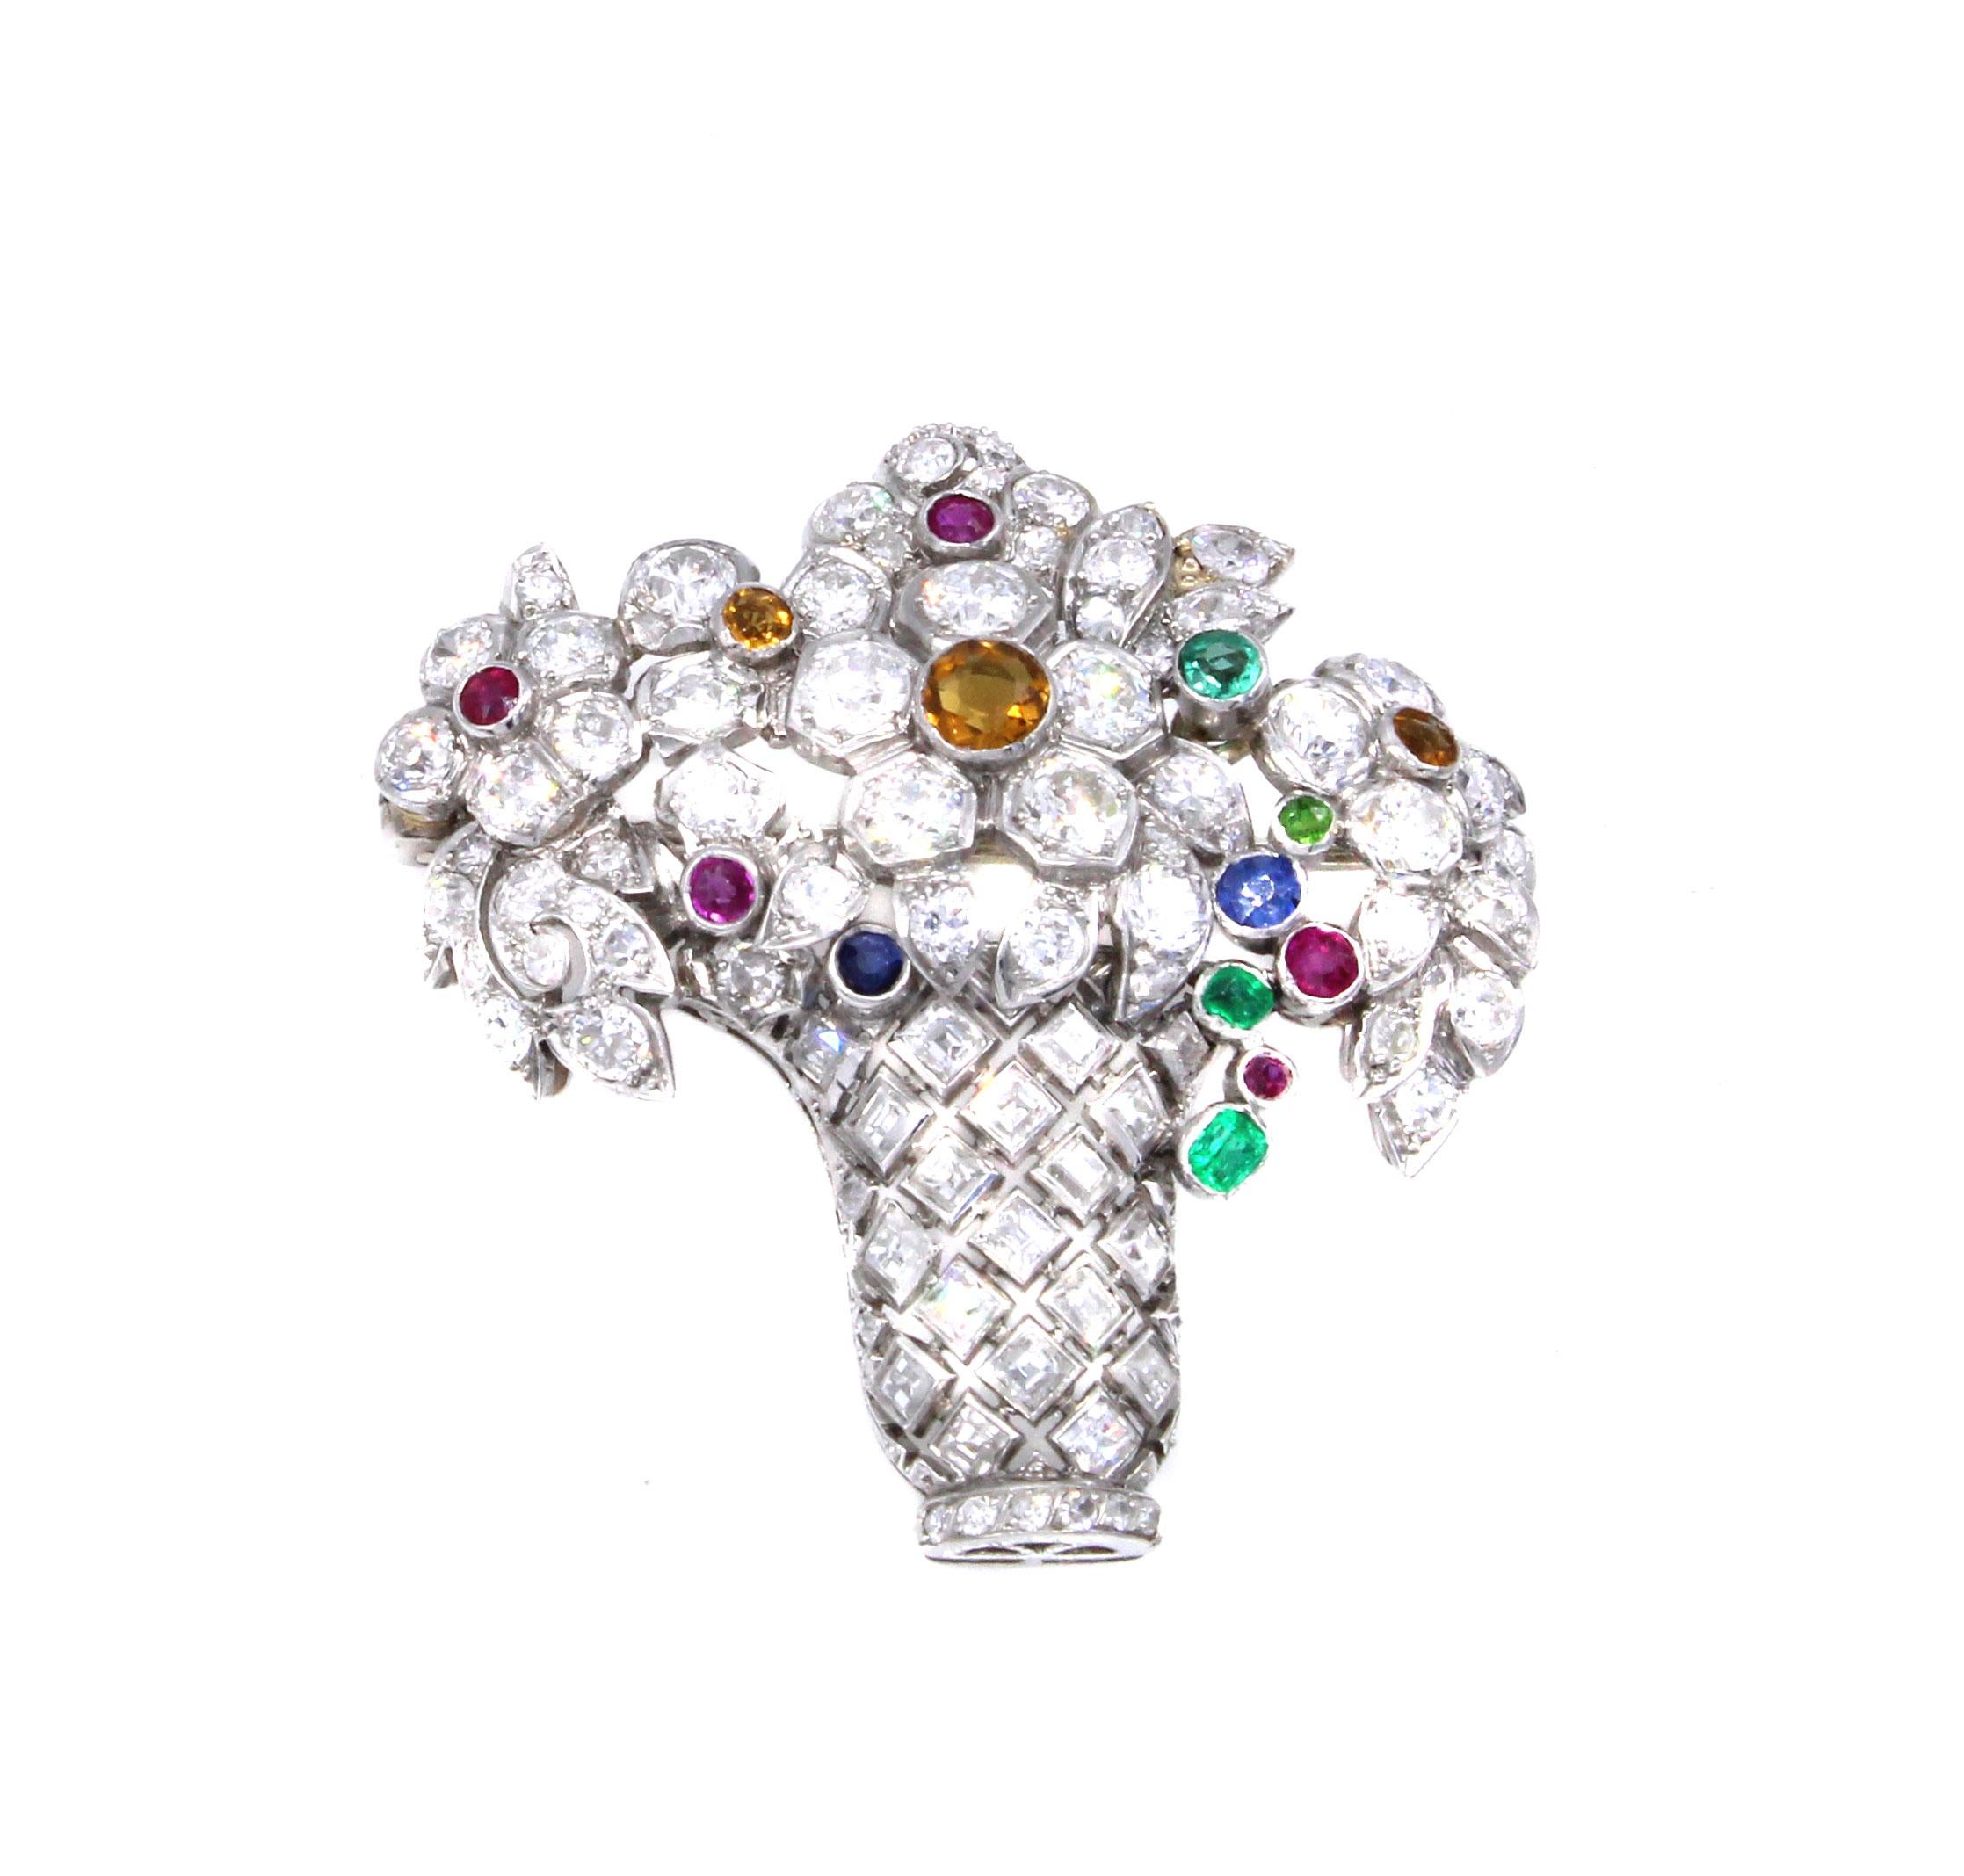 Beautifully designed and masterfully hand-crafted this Art Deco Jardinière brooch from ca 1925 is set with a mixture of bright white and sparkly Old European Cut diamonds and square step-cut diamonds. The bouquet of floral motifs are embellished